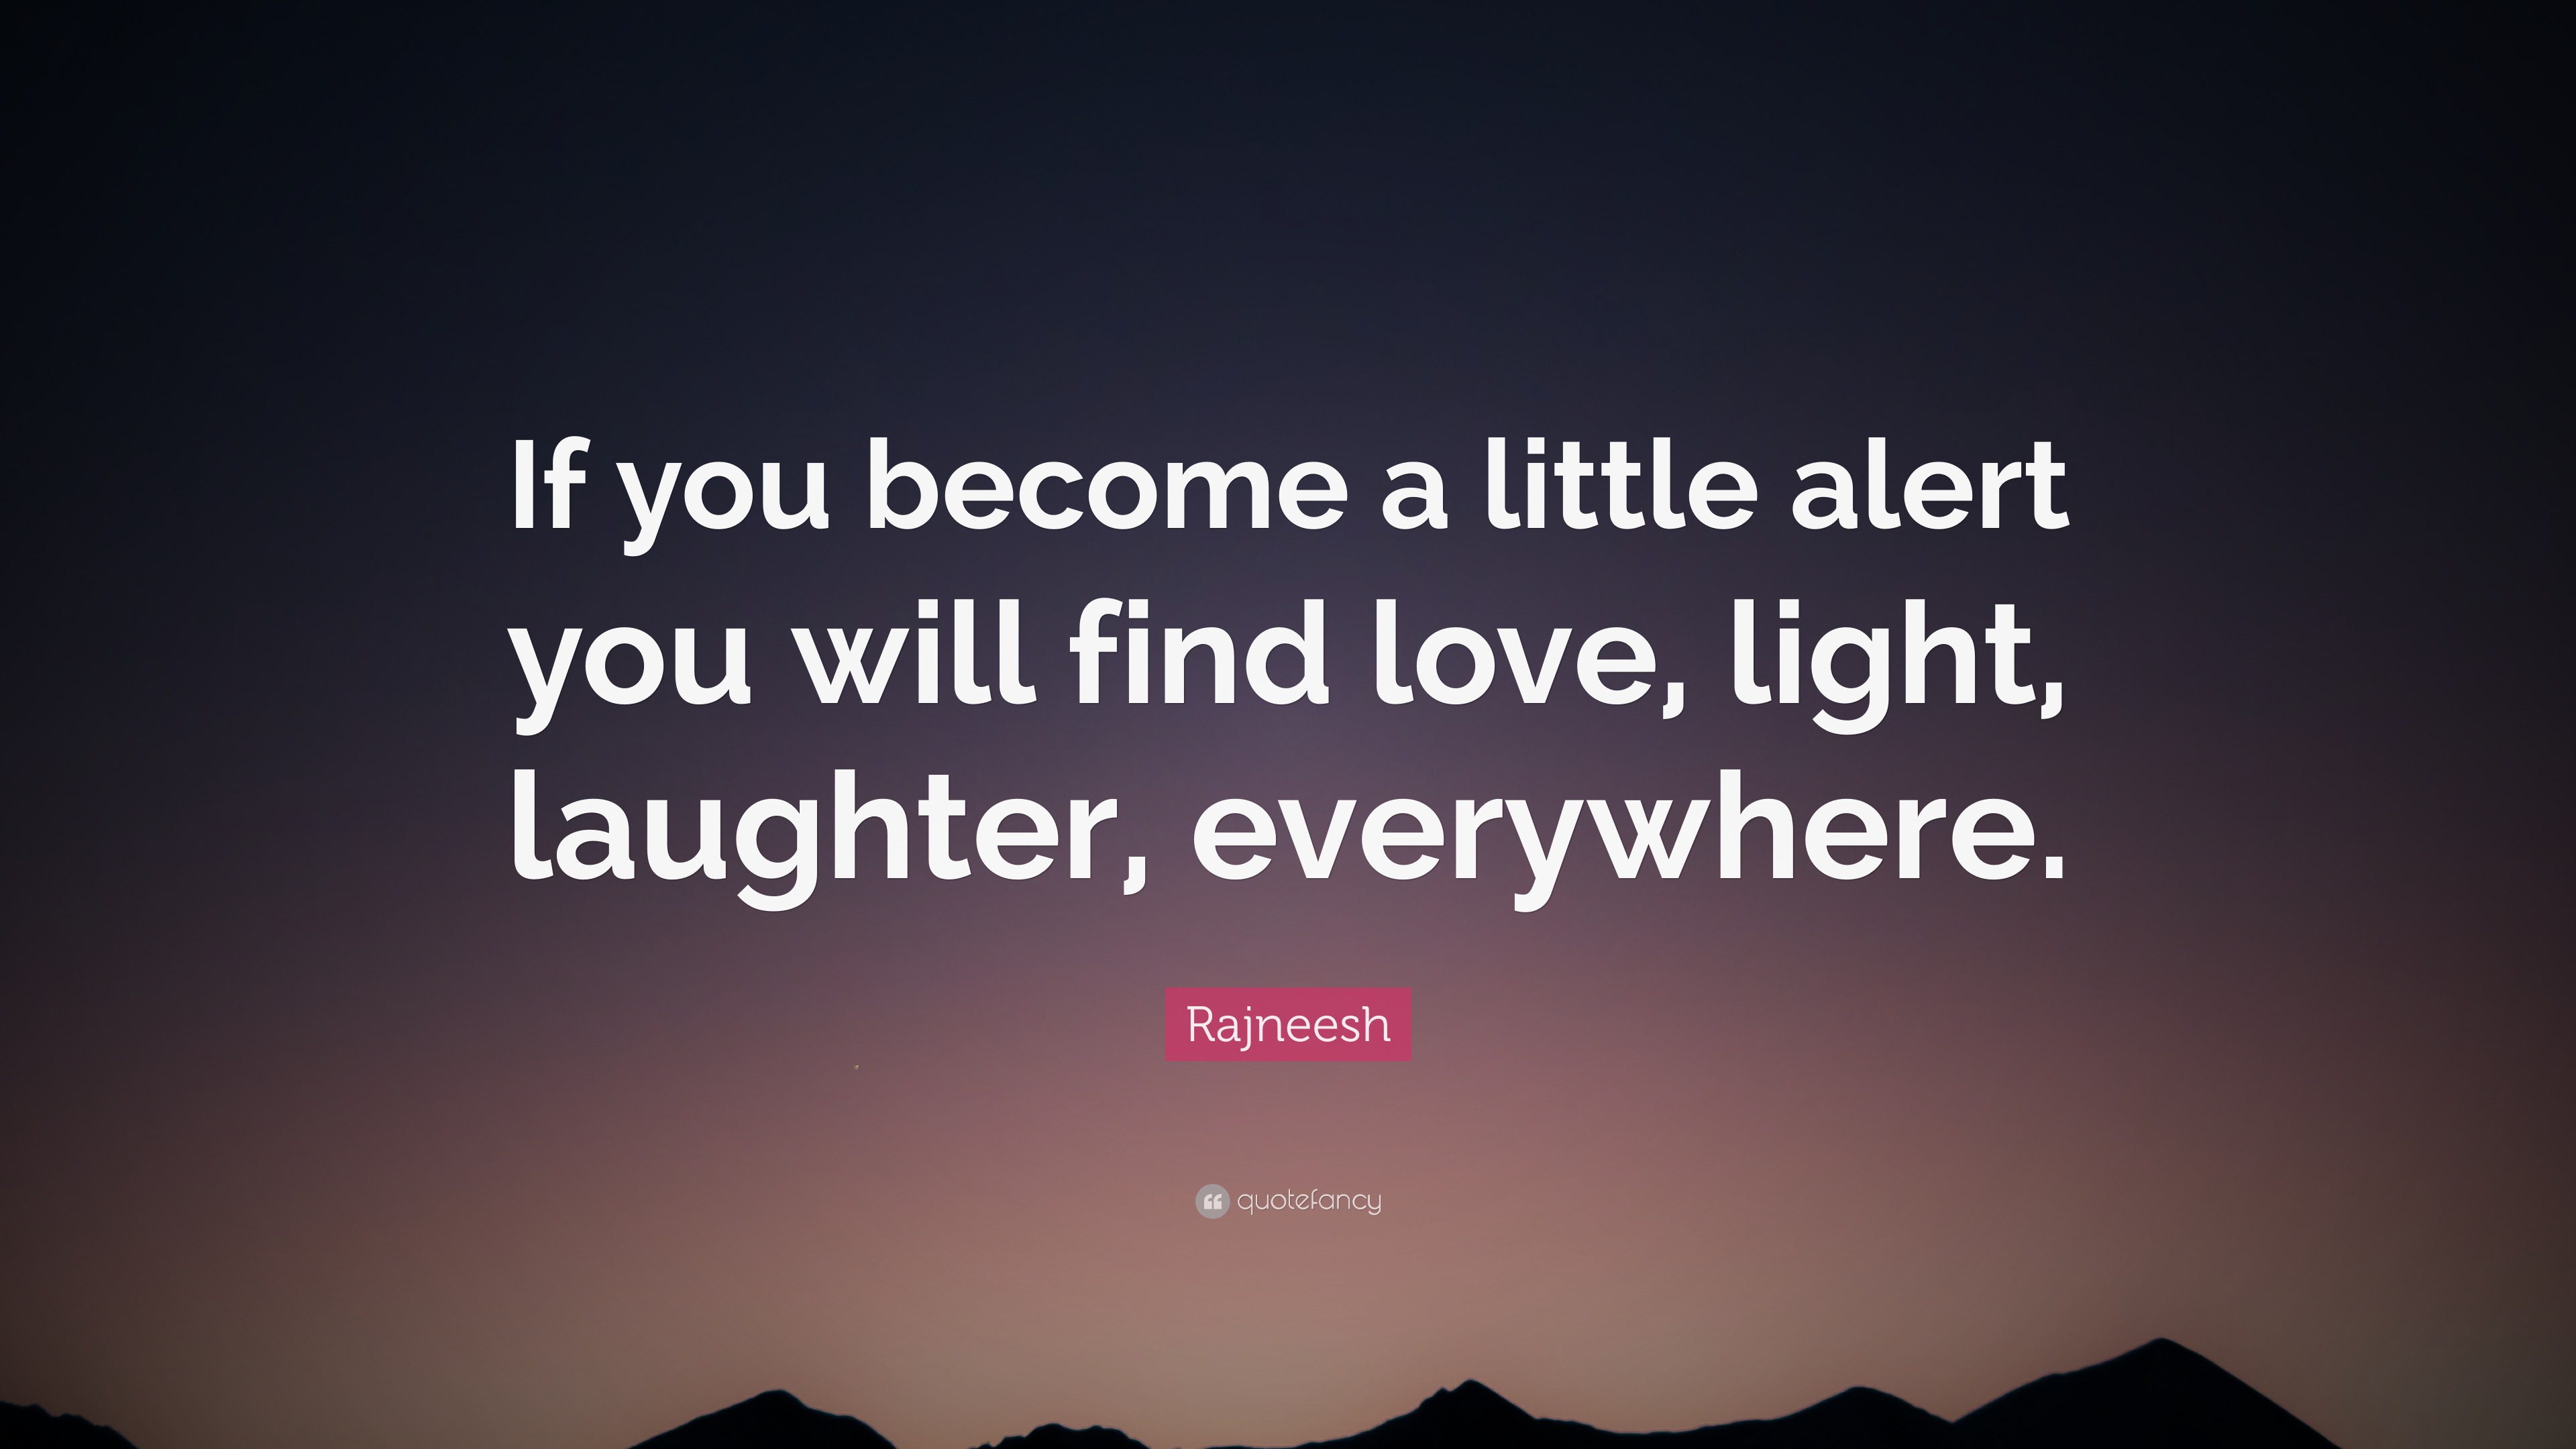 Rajneesh Quote “If you be e a little alert you will find love light